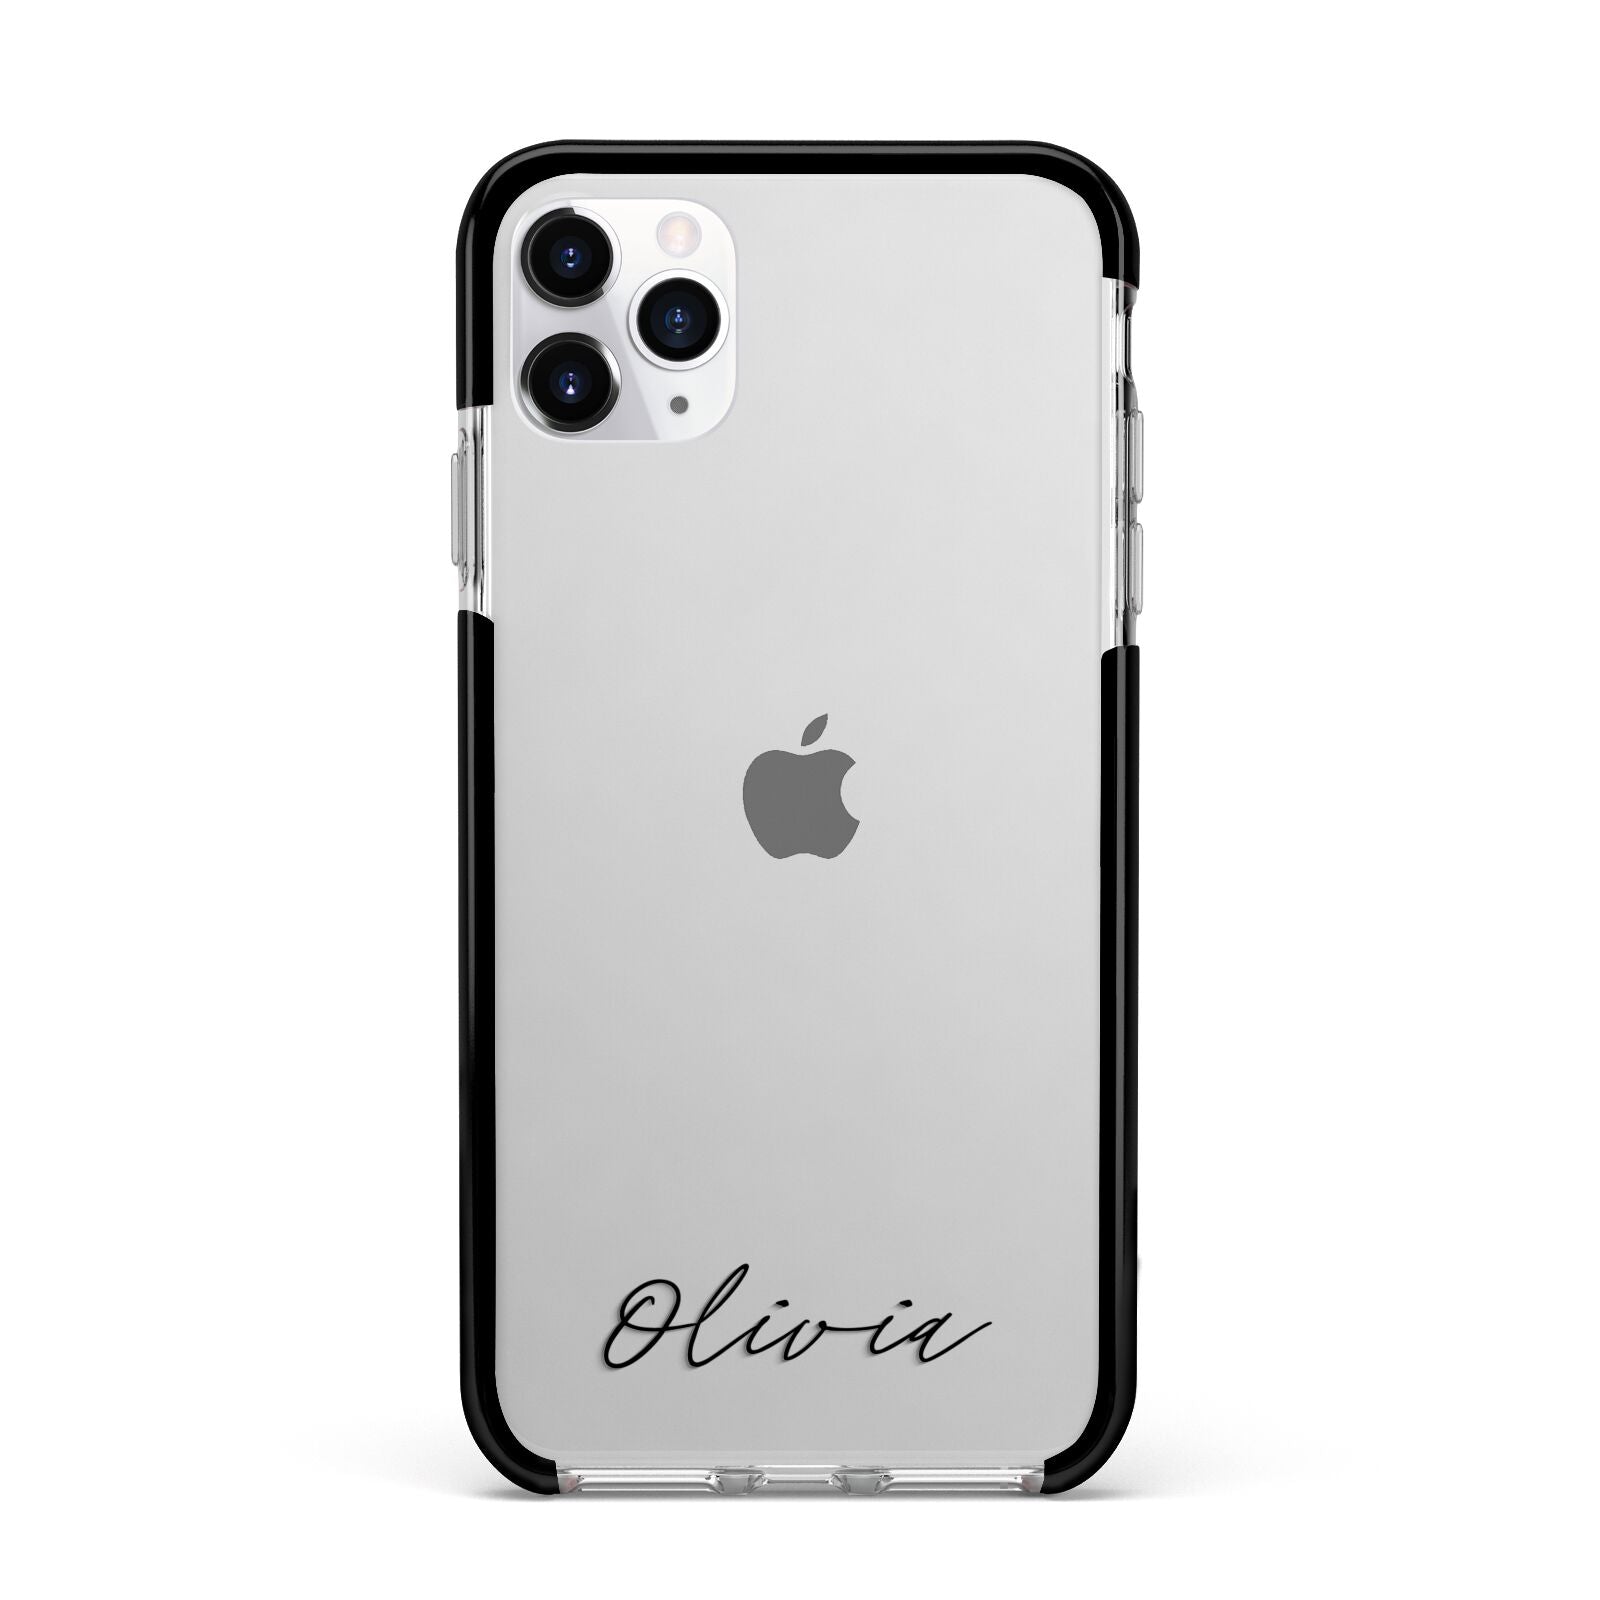 Scroll Text Name Apple iPhone 11 Pro Max in Silver with Black Impact Case